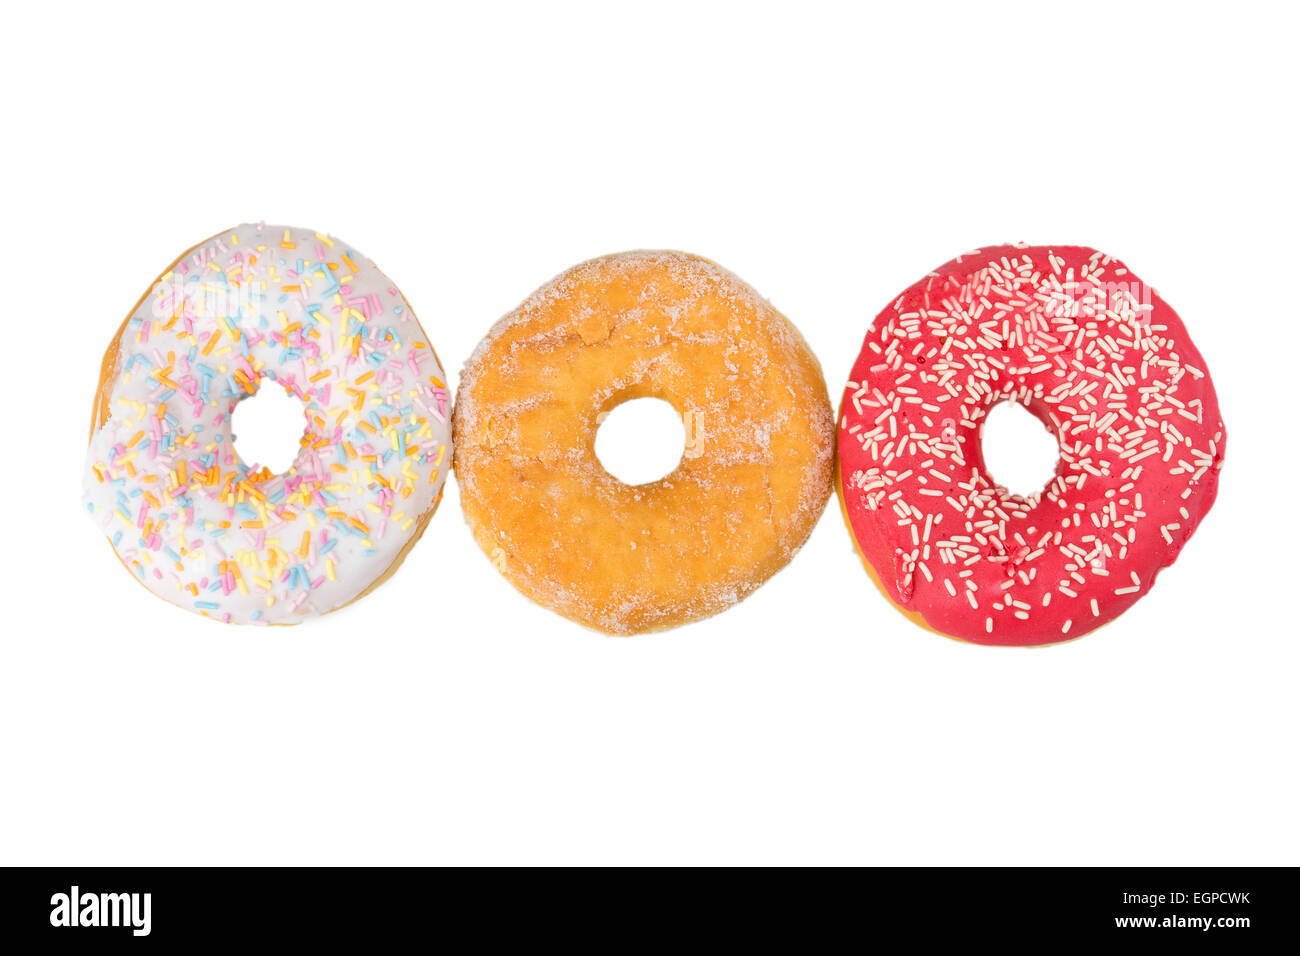 several donuts isolated on white background Stock Photo